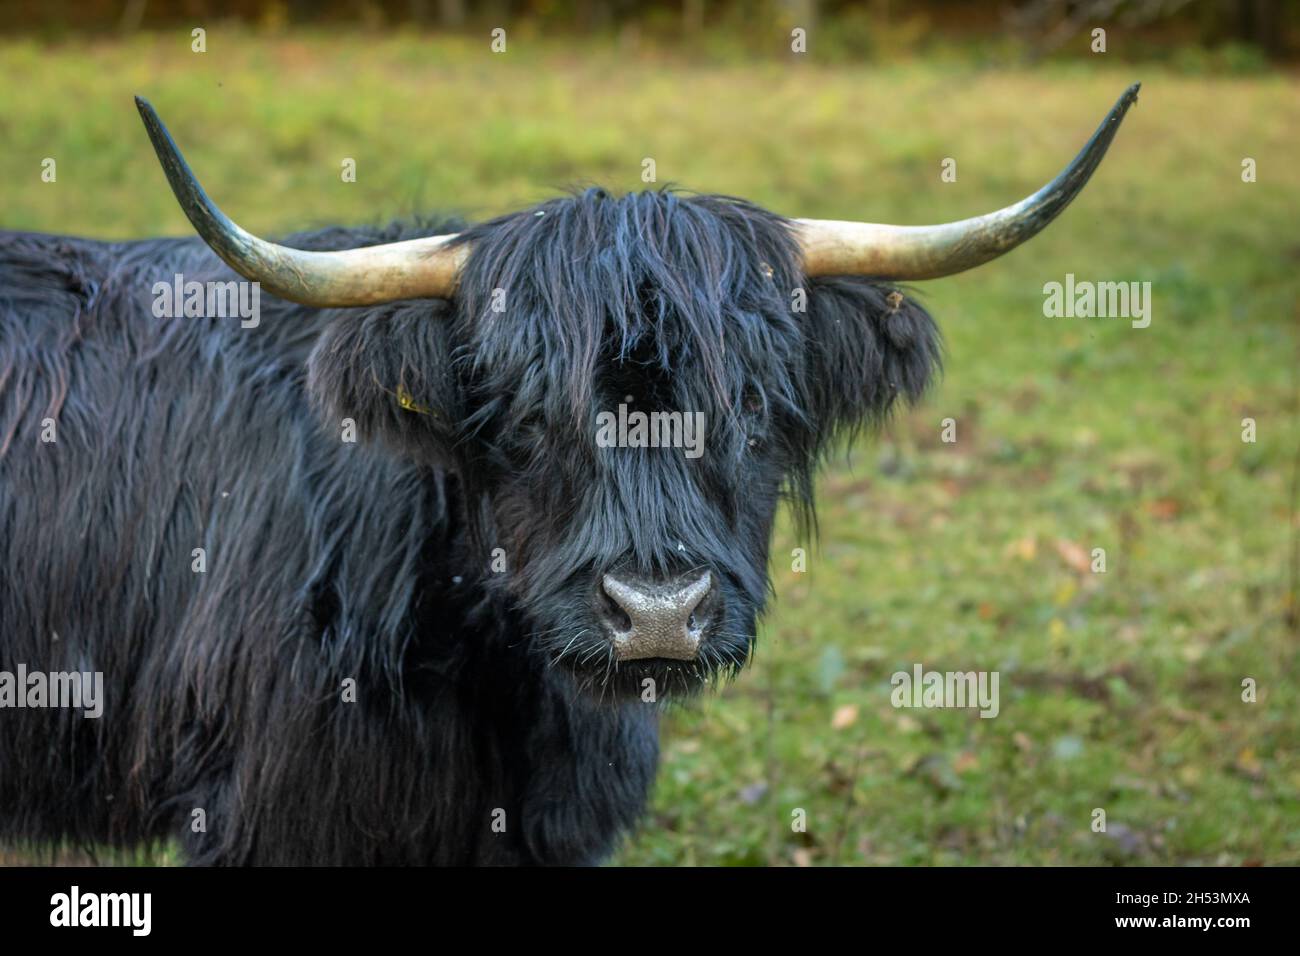 scottish highland cattle with dark fur cares for vegetation on a meadow in a nature reserve in southern germany Stock Photo